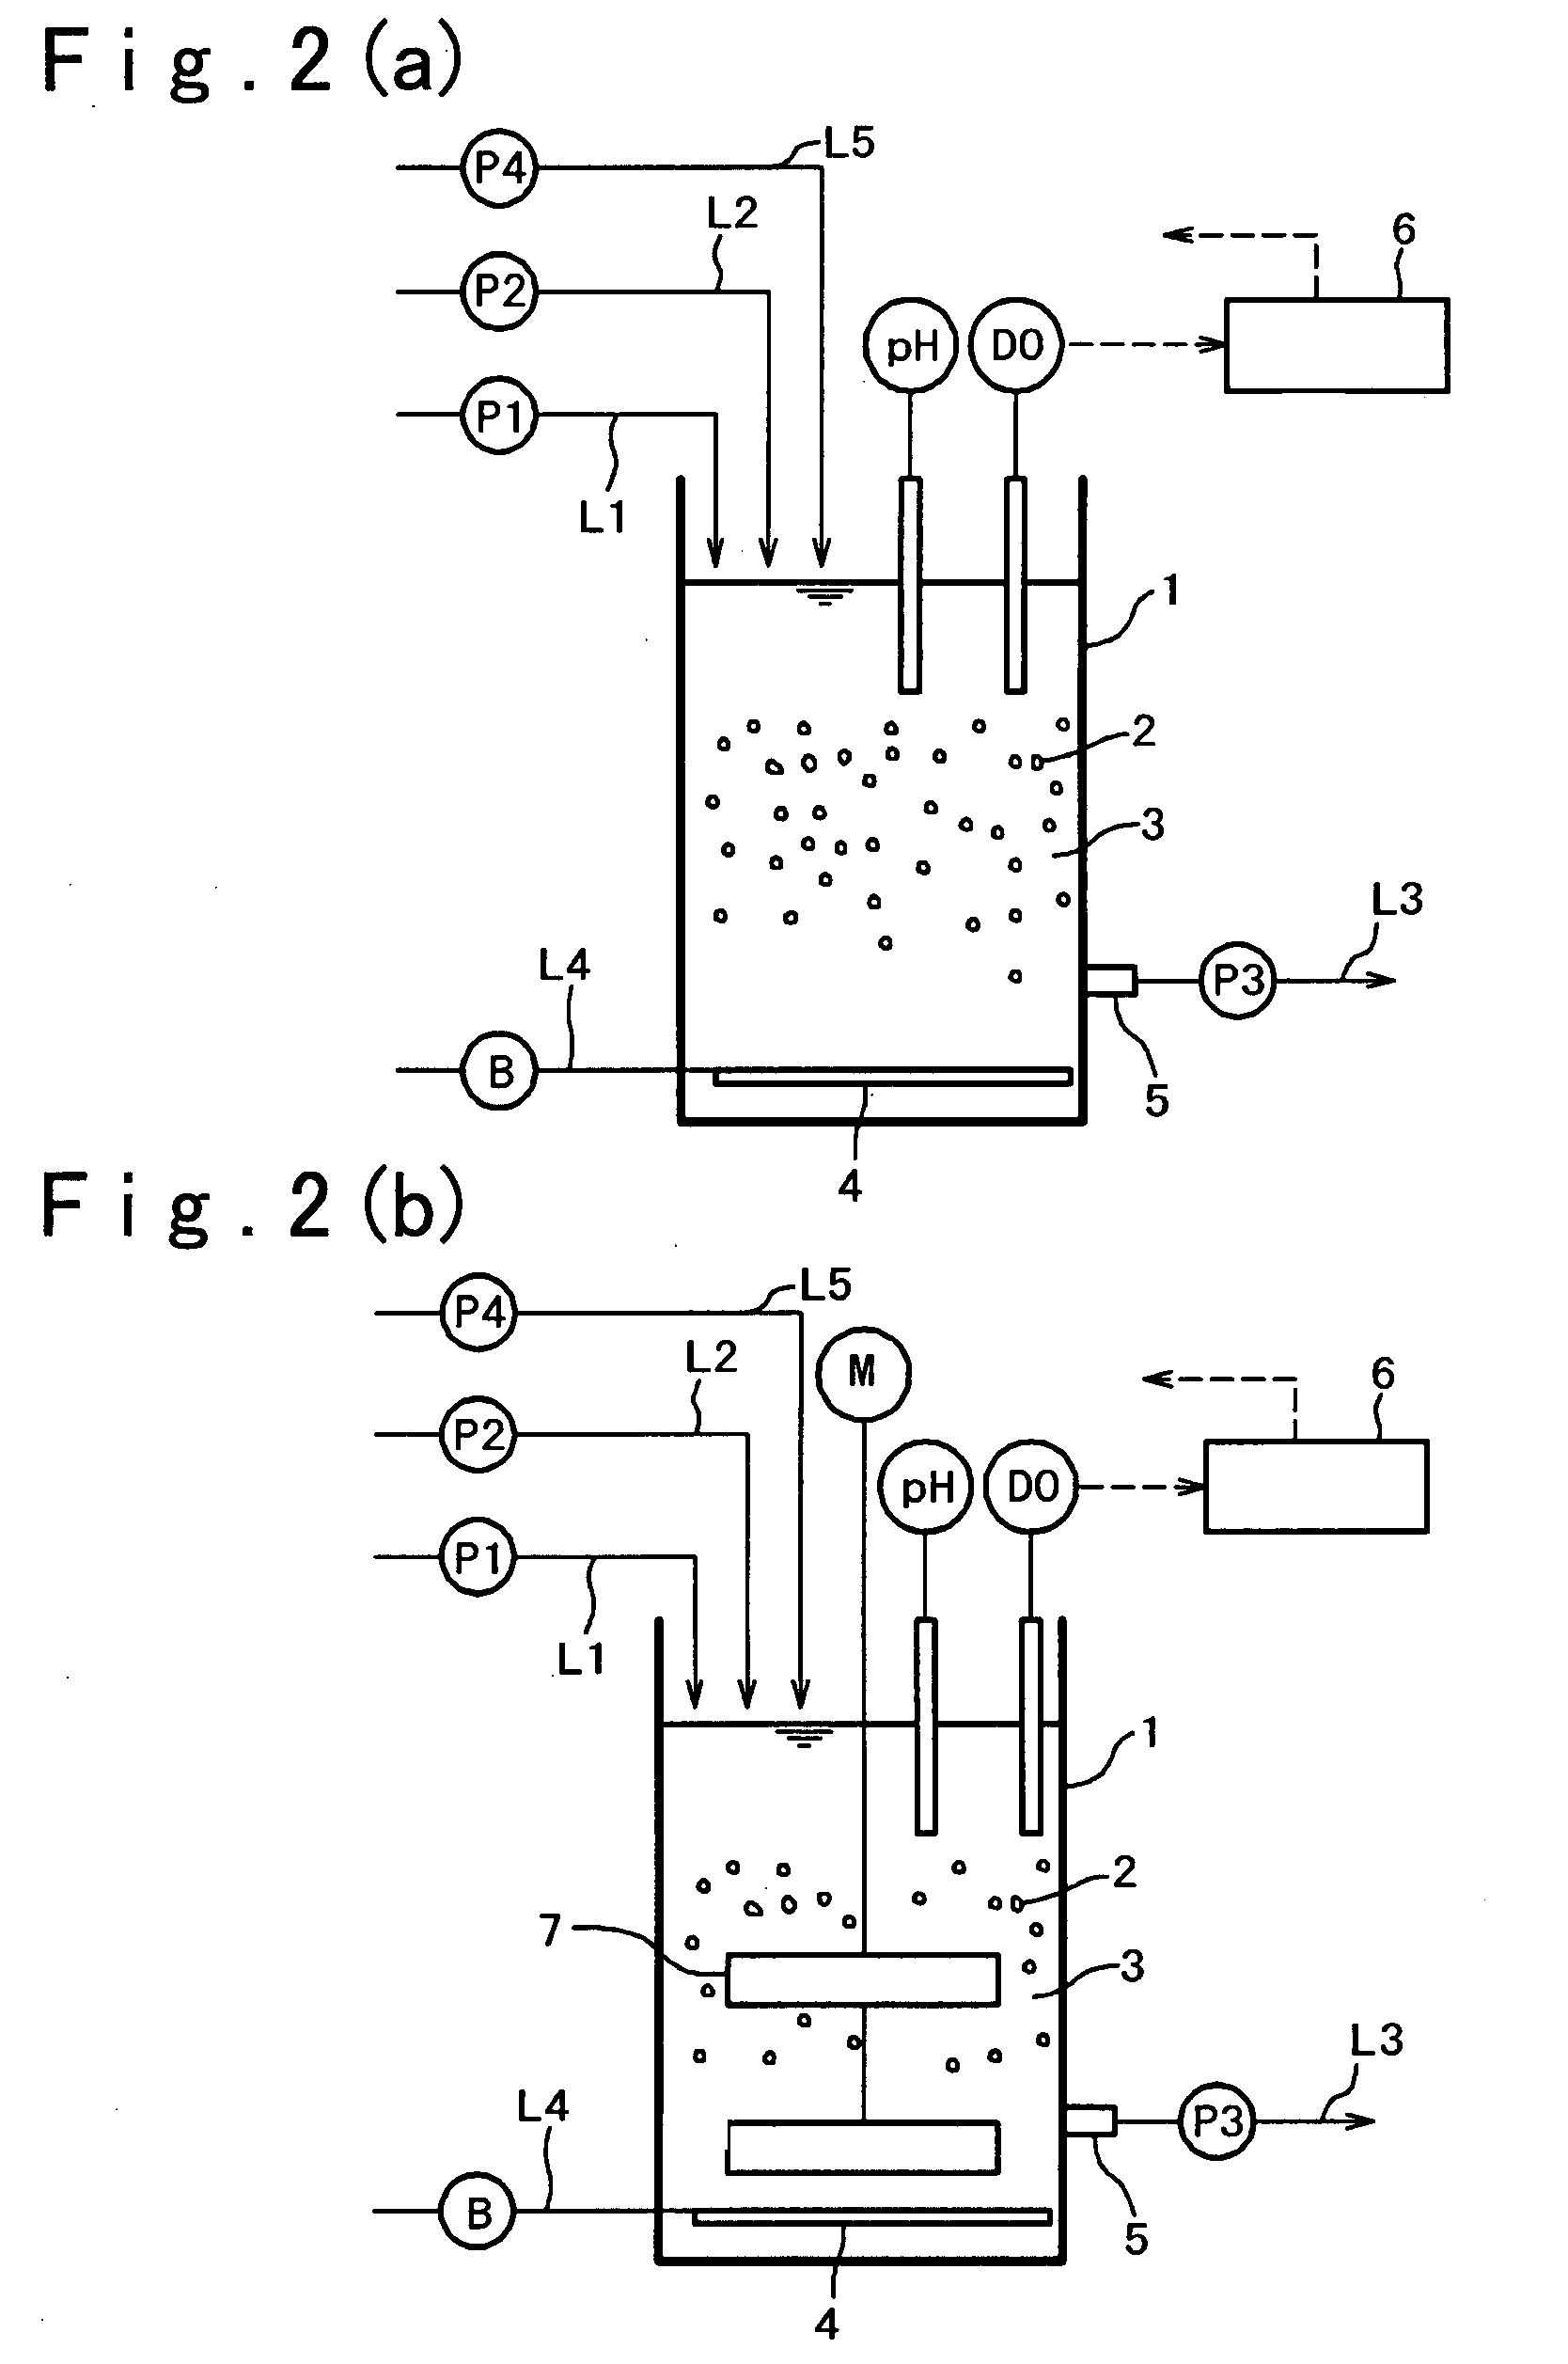 Process and Apparatus for Treating Nitrogeneous Liquor